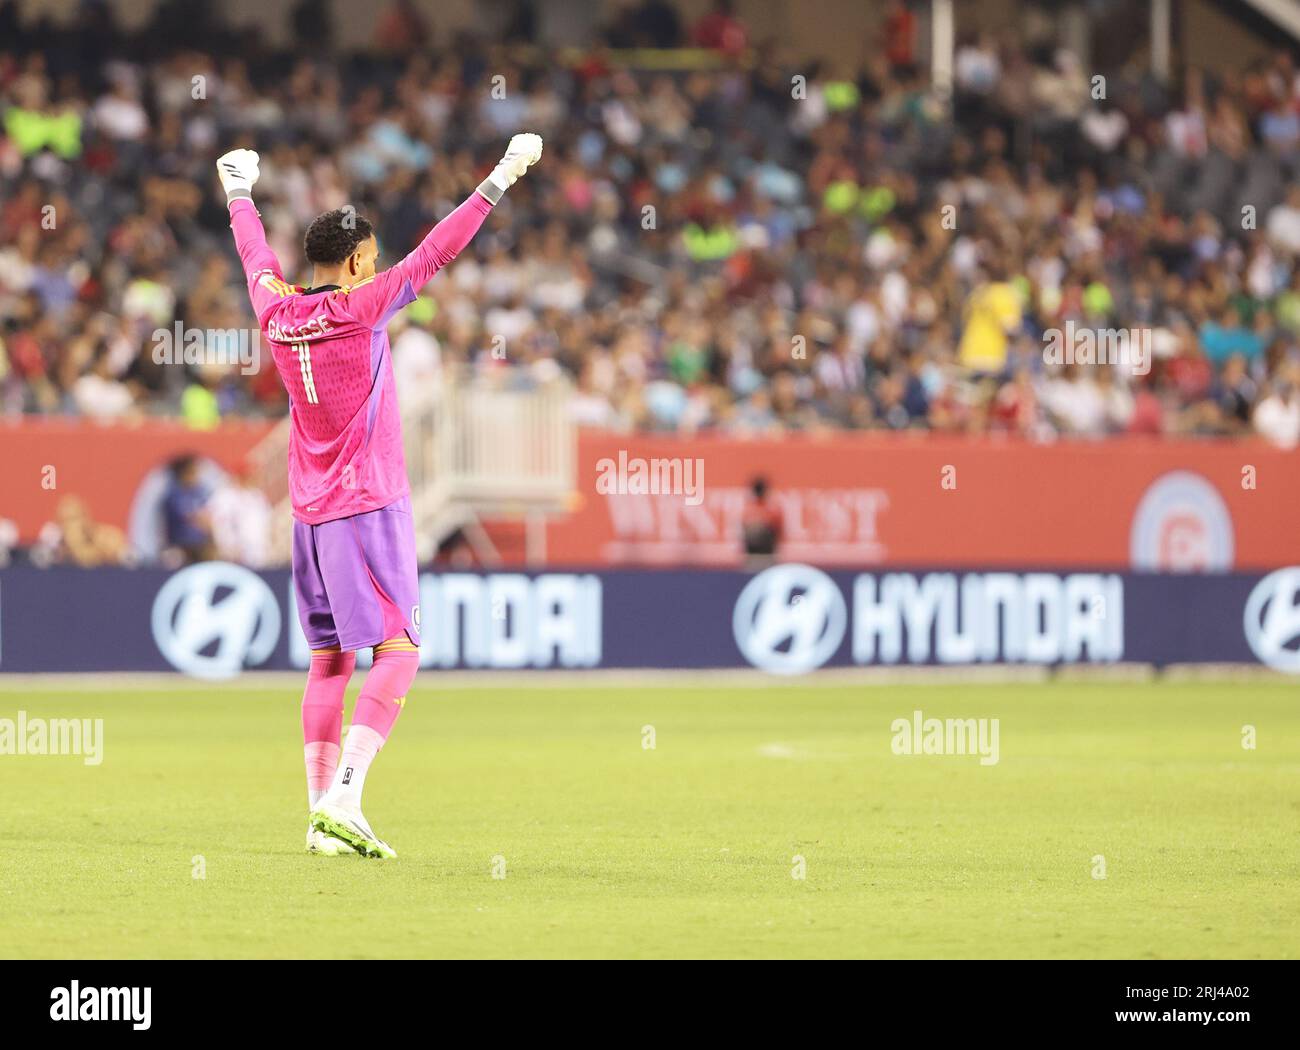 Chicago, USA, 20 August 2023. Major League Soccer (MLS) Orlando City SC goalkeeper Pedro Gallese celebrates a goal against the Chicago Fire FC at Soldier Field in Chicago, IL, USA. Credit: Tony Gadomski / All Sport Imaging / Alamy Live News Stock Photo